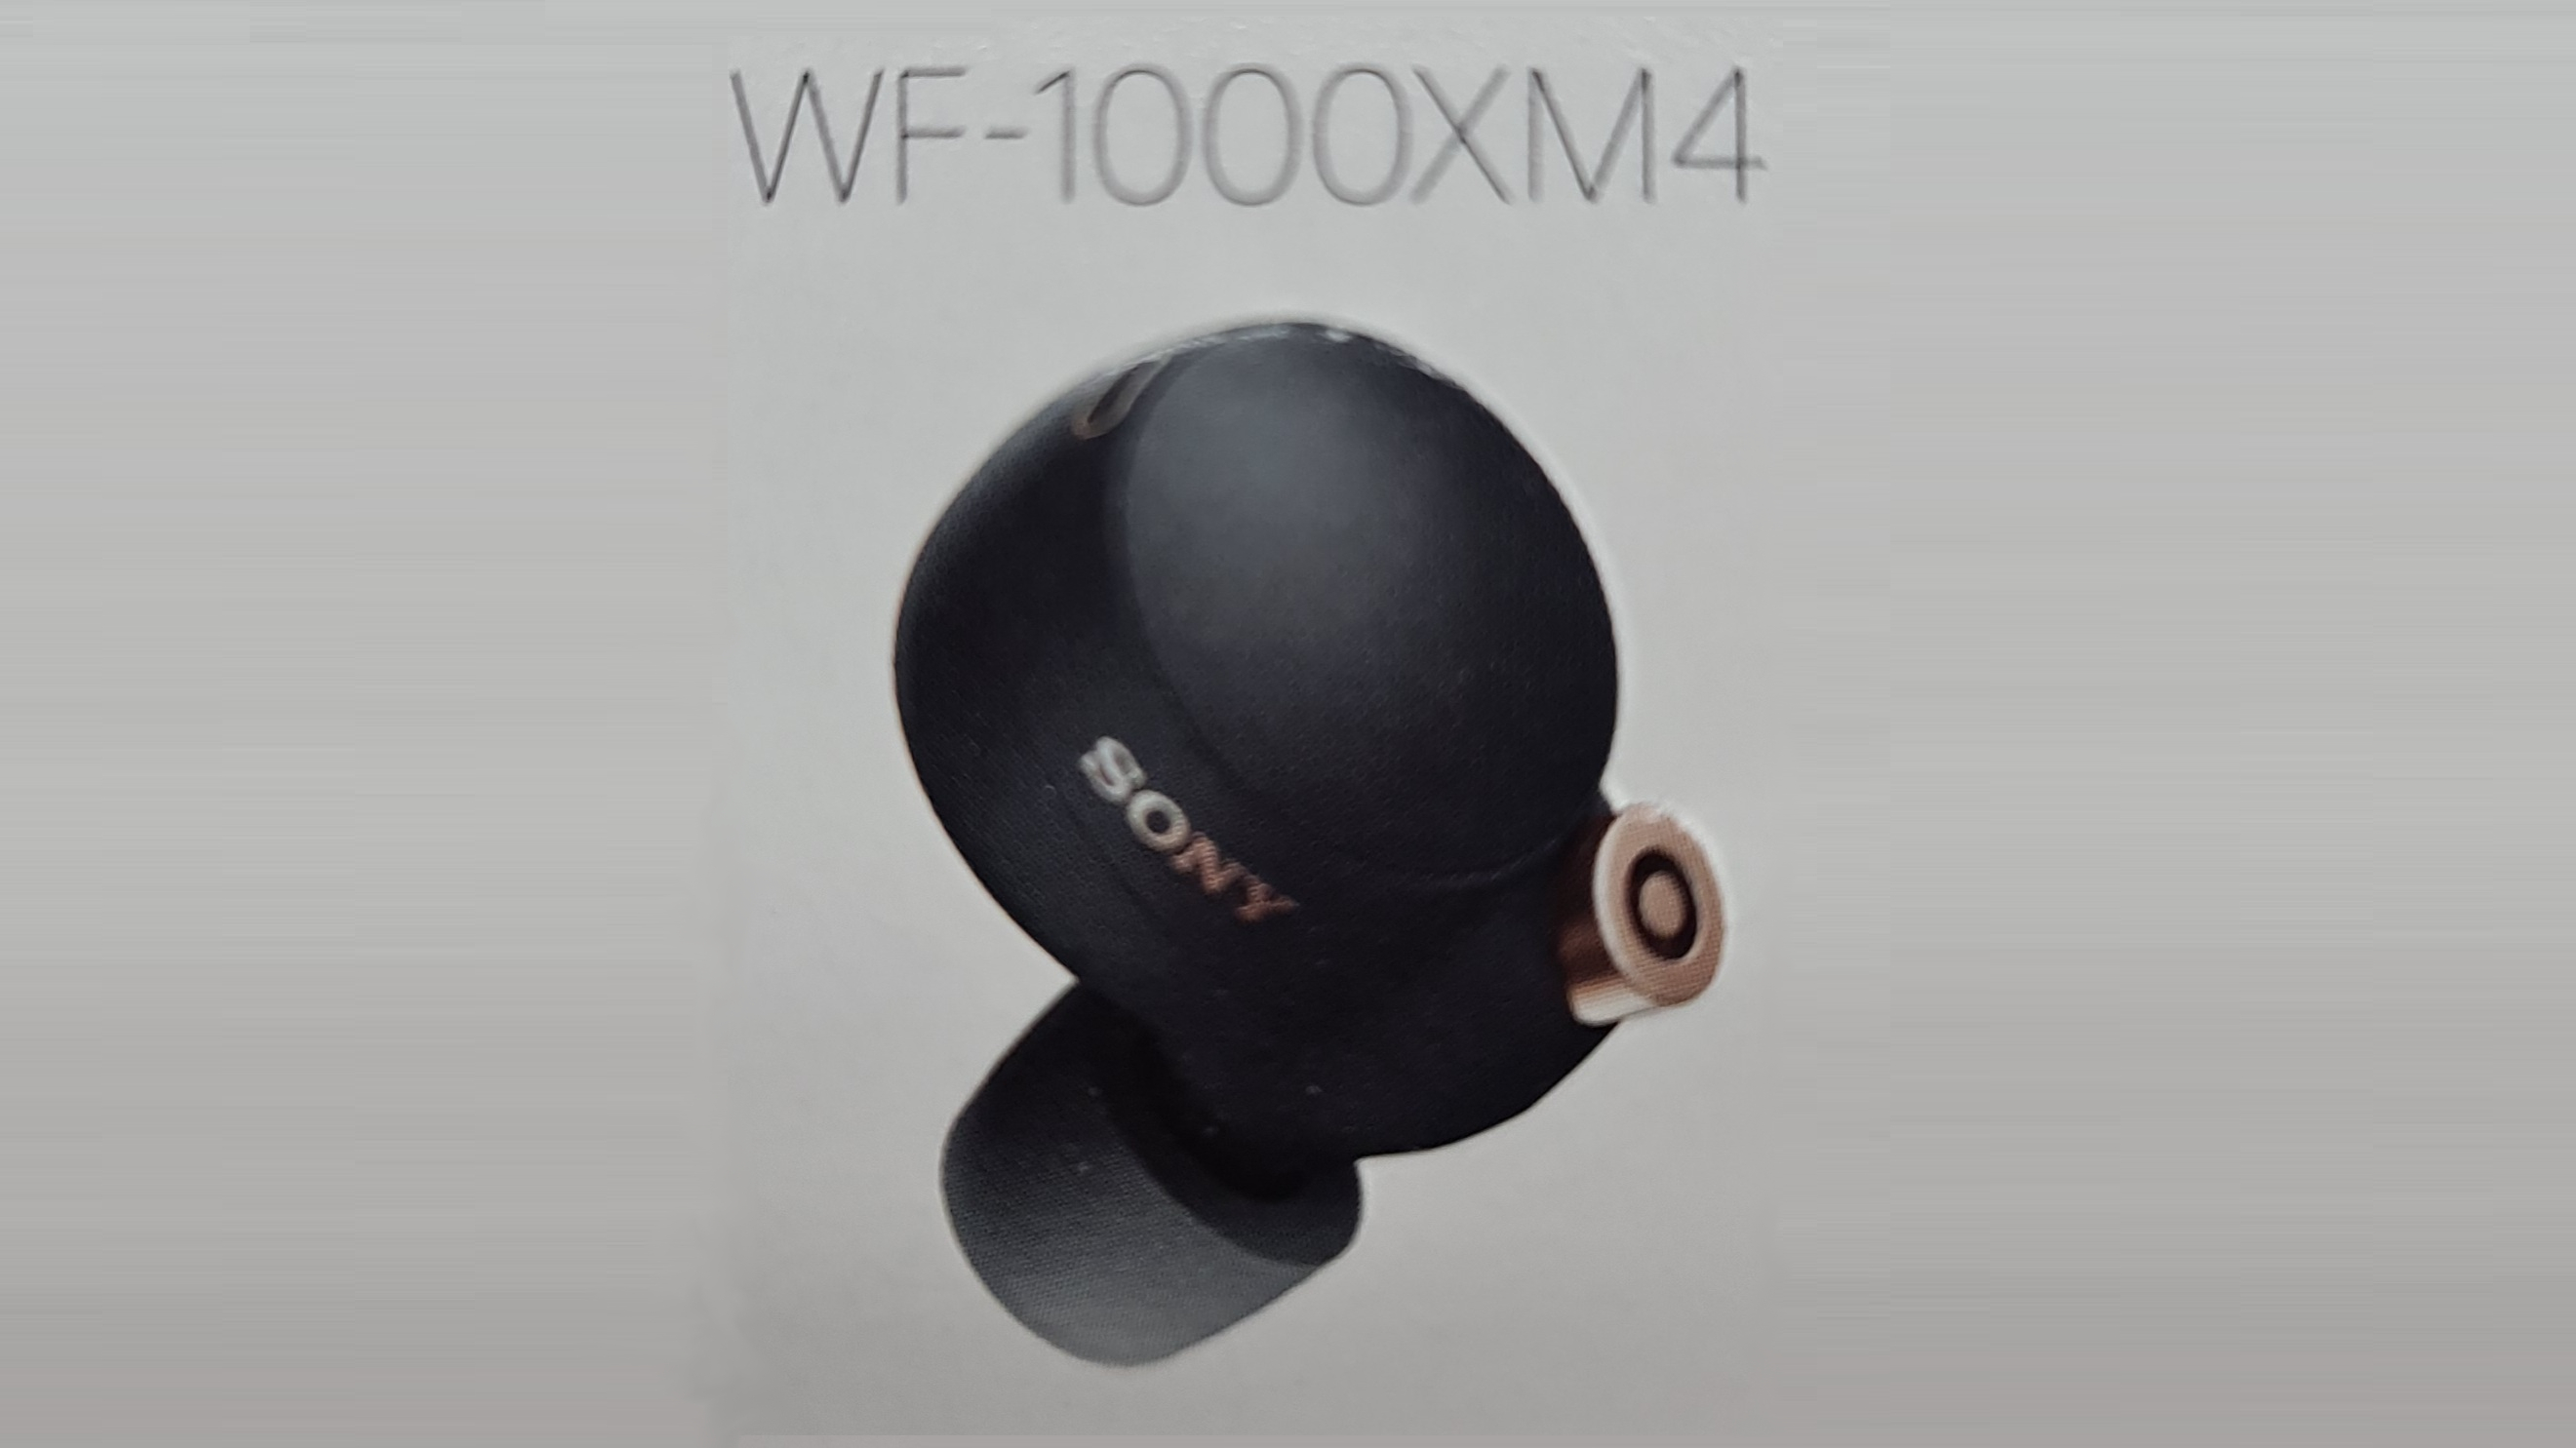 Sony WF-1000XM4 could get dethroned by these new true wireless